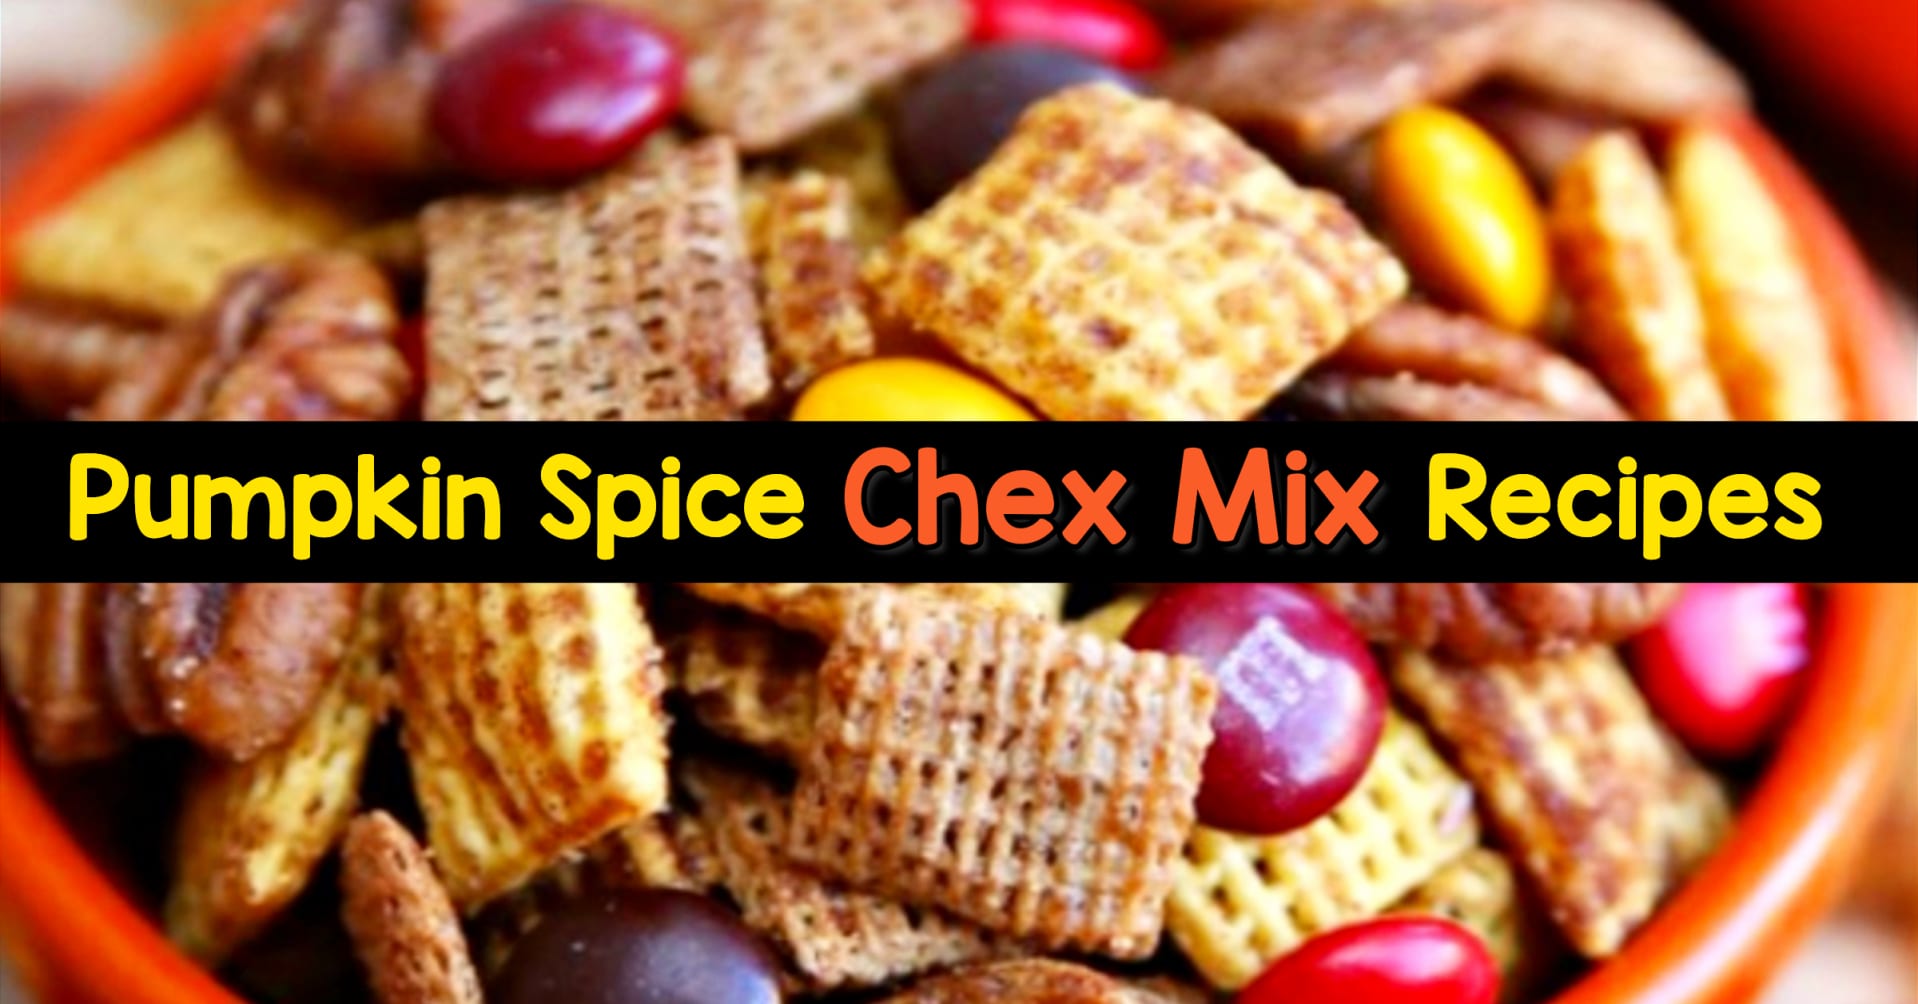 Sweet Chex Mix Recipe Ideas and Holiday Snack Mix Recipes - Pumpkin Spice Chex Snack Mix For party snack food this Fall! Thanksgiving snack mix recipes - yummy sweet and salty Chex Mix with M&Ms and pumpkin spice - pretzel snack mix recipe too